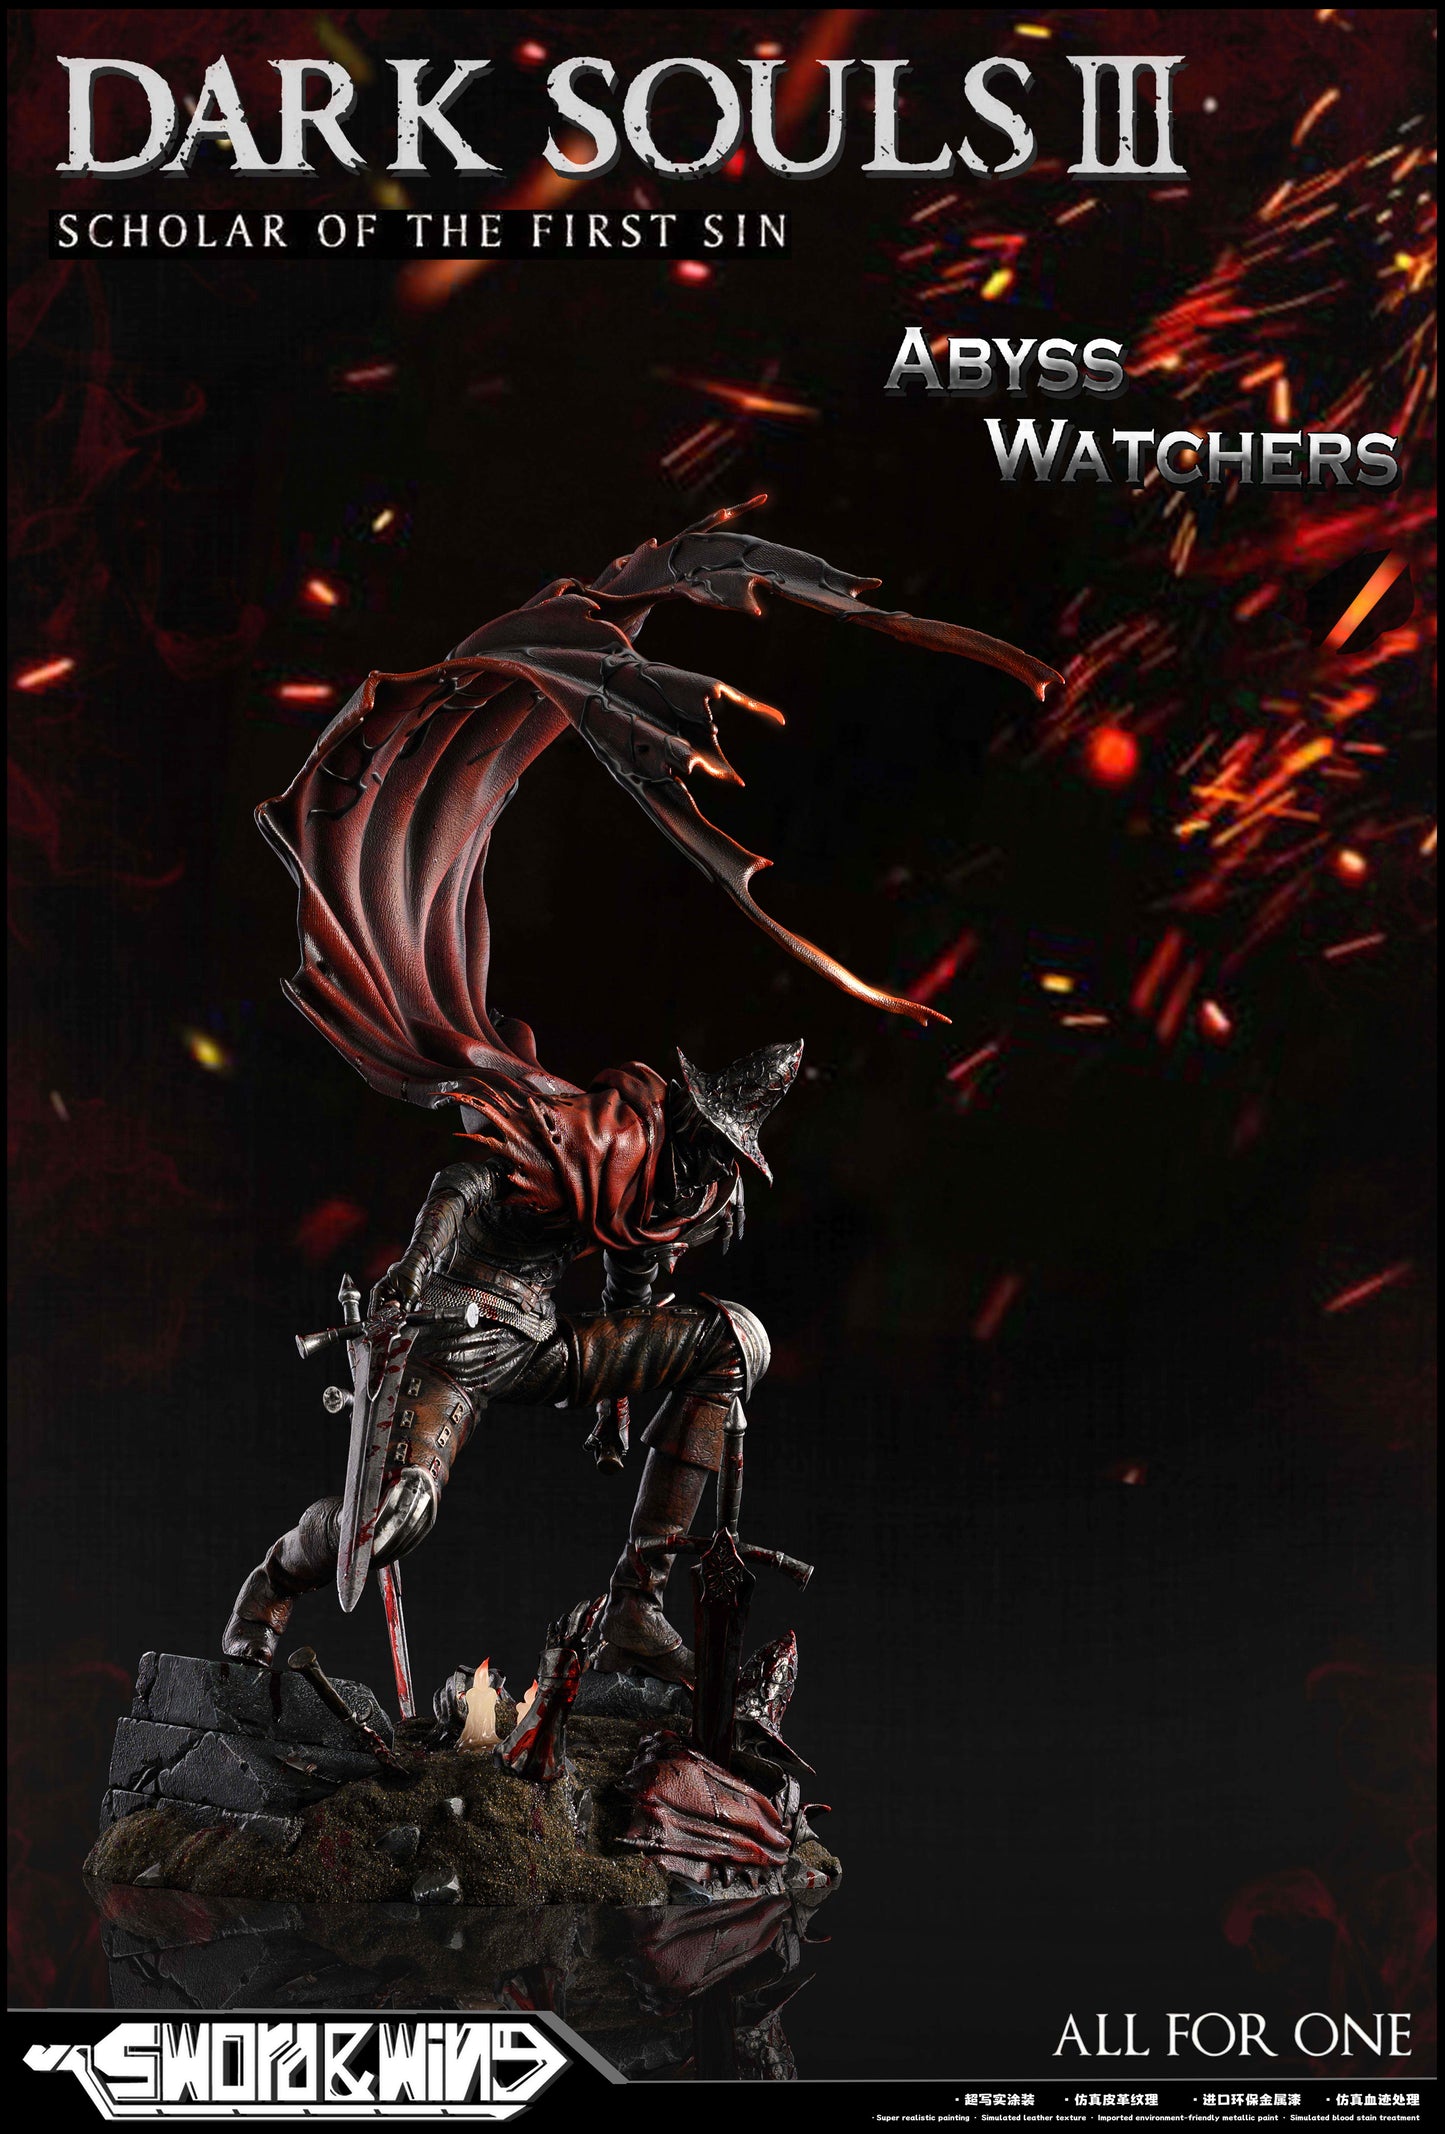 SWORD & WING STUDIO – DARK SOULS 3: ABYSS WATCHERS [SOLD OUT]